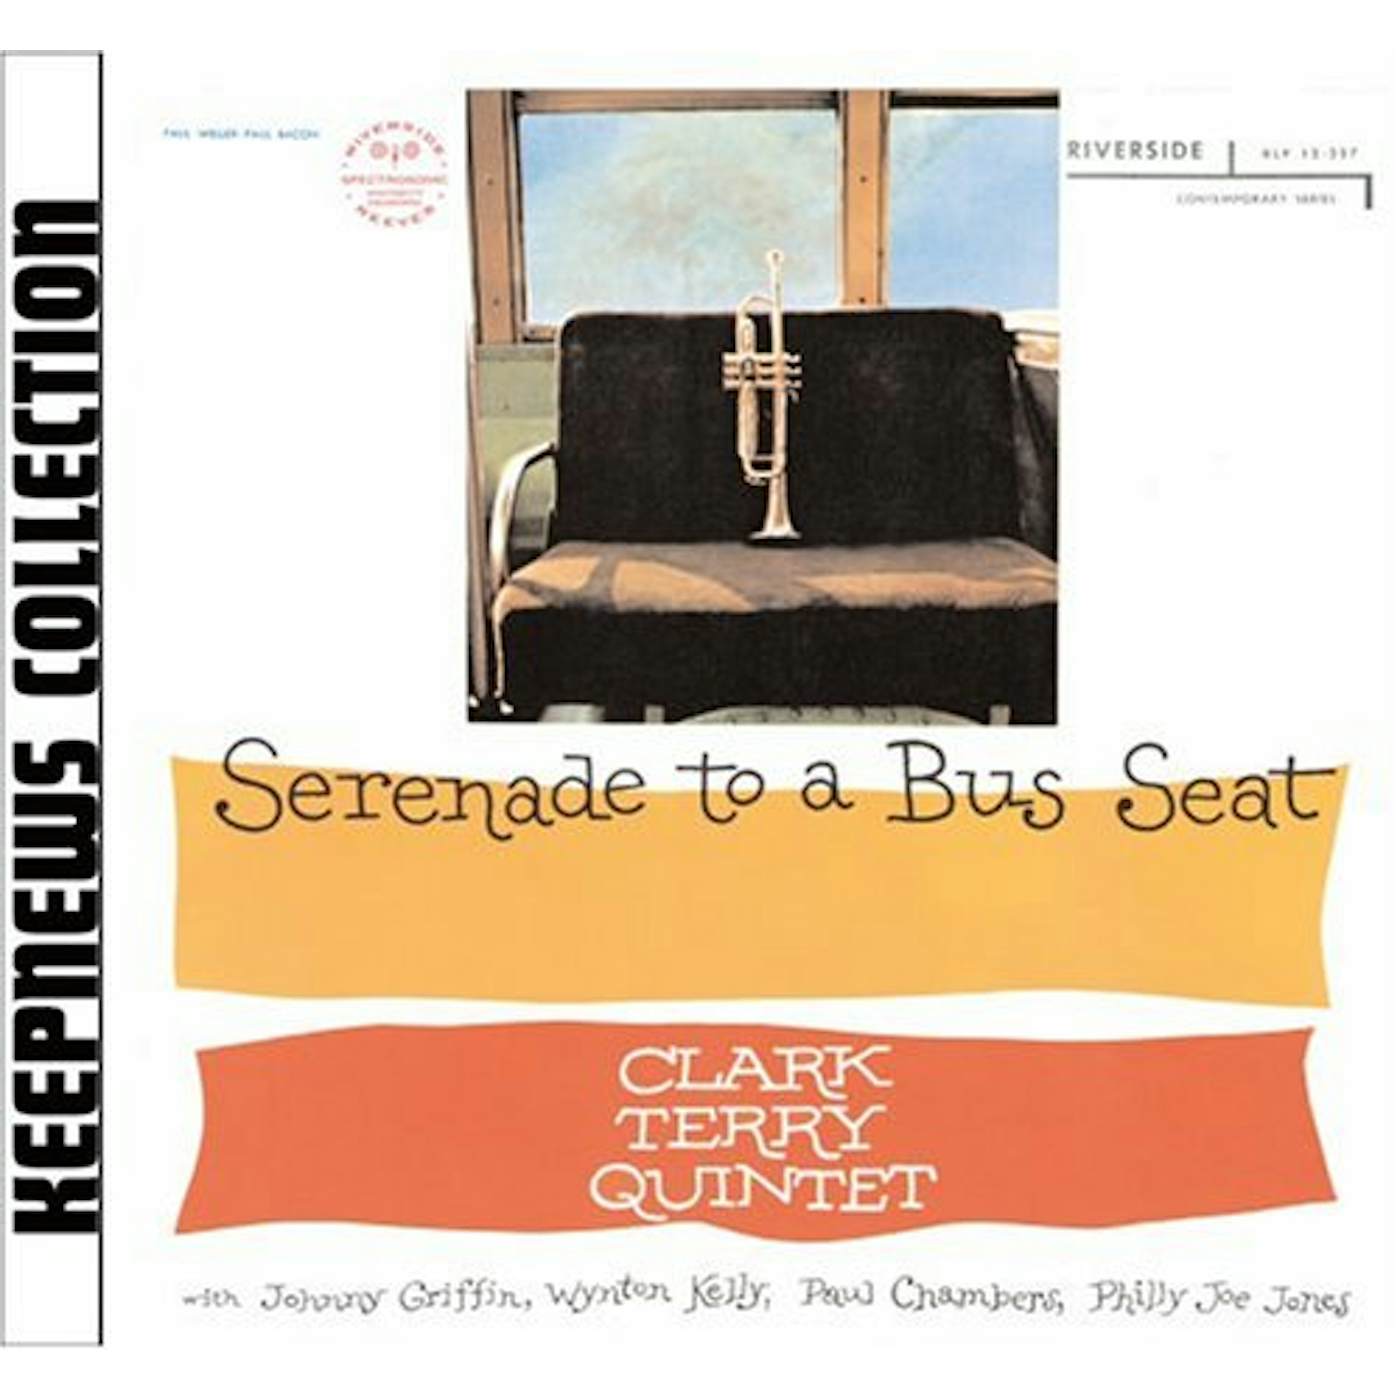 Clark Terry SERENADE TO A BUS SEAT CD